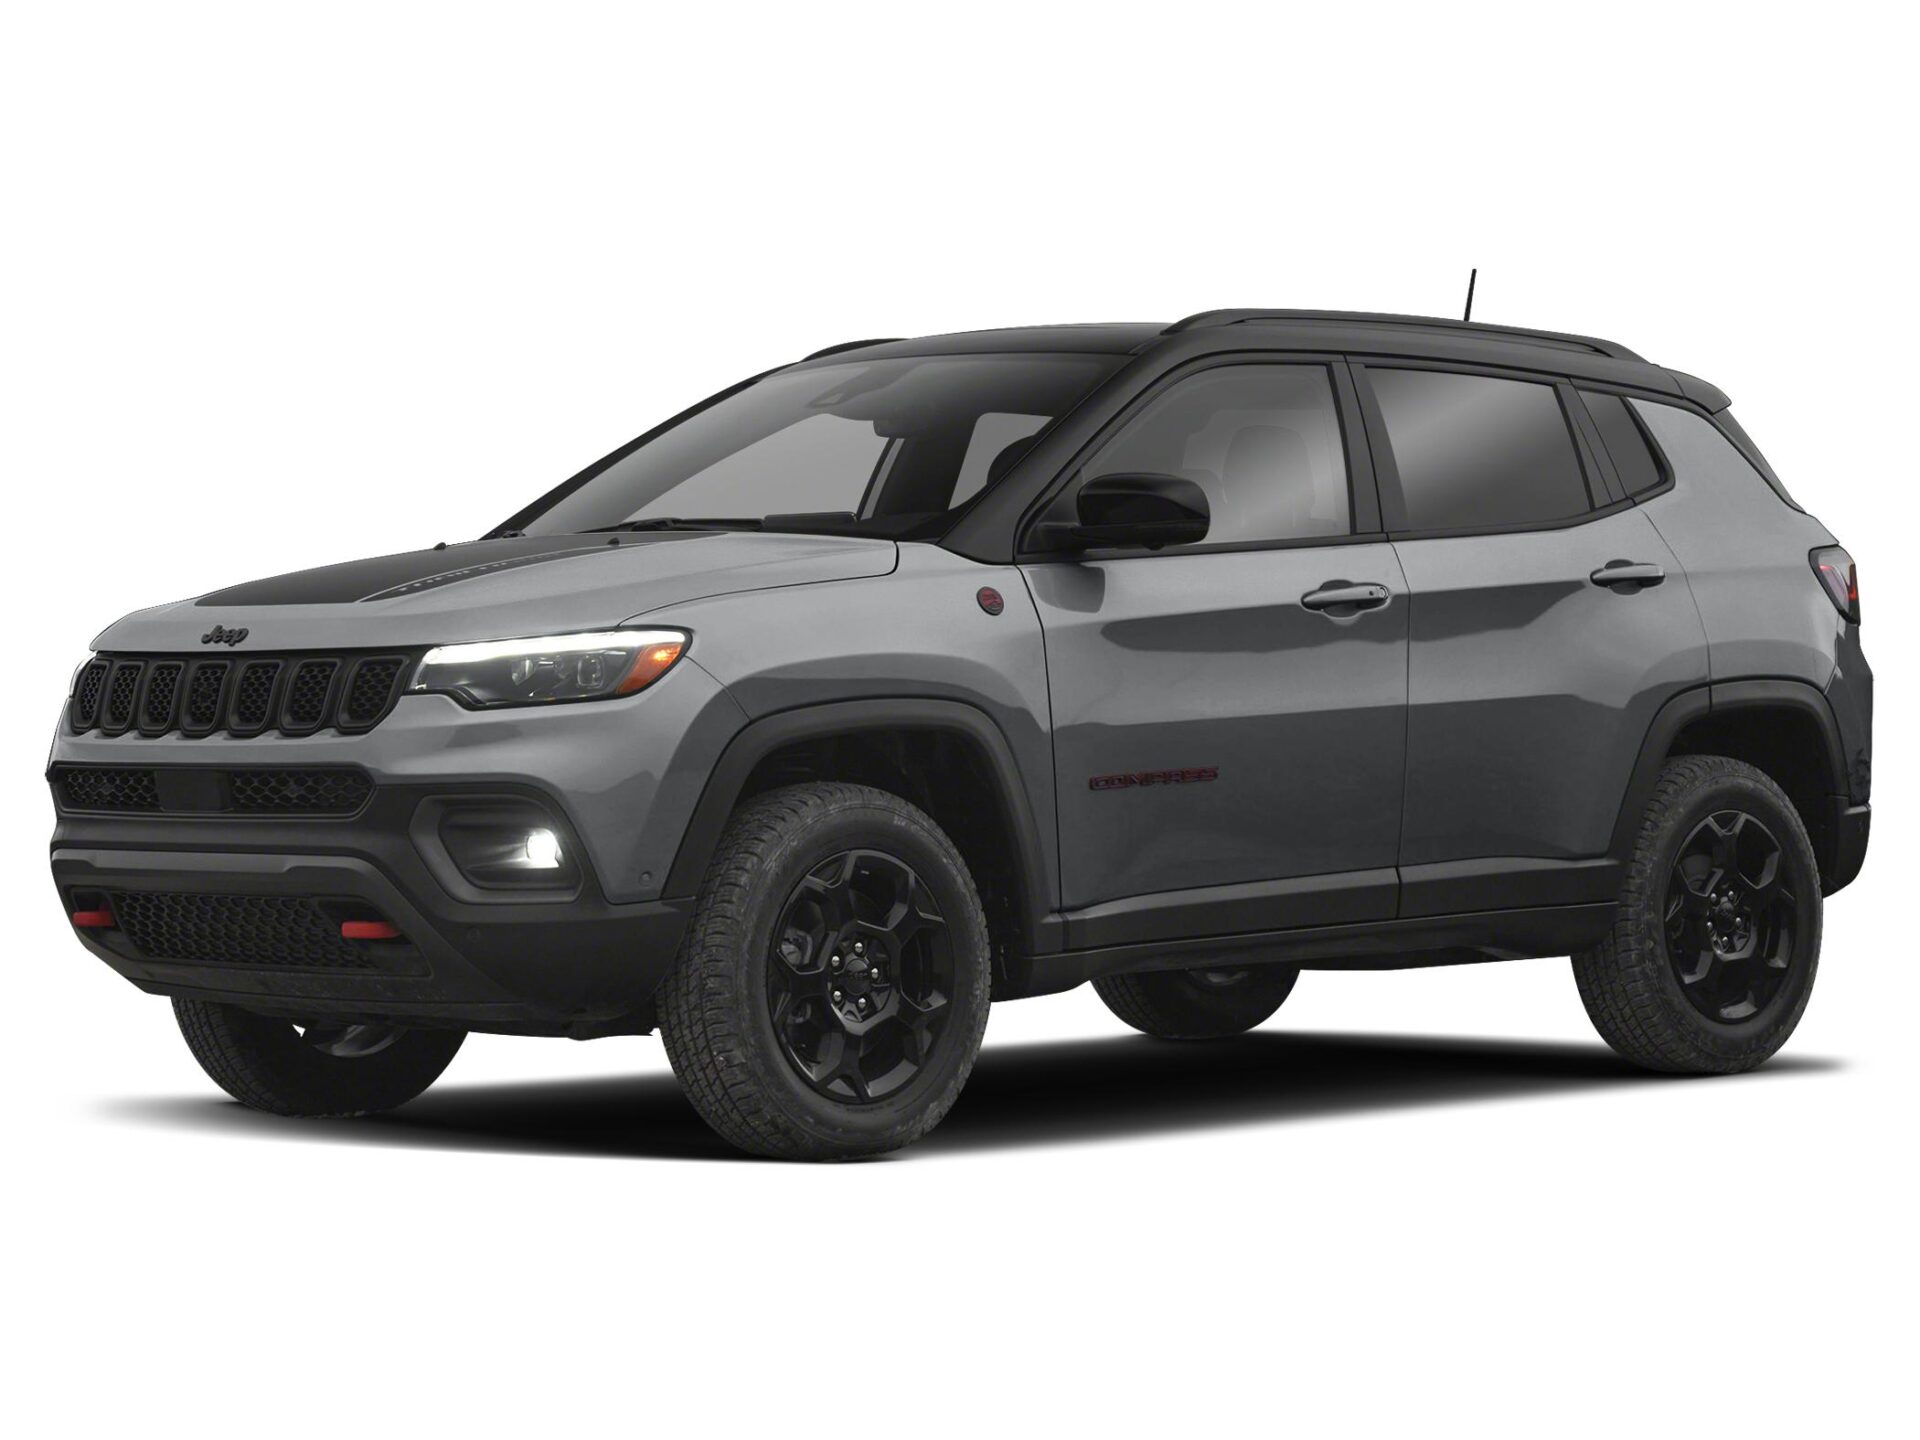 Jeep Compass 4X4 Trailhawk lease NYC Exterior Front